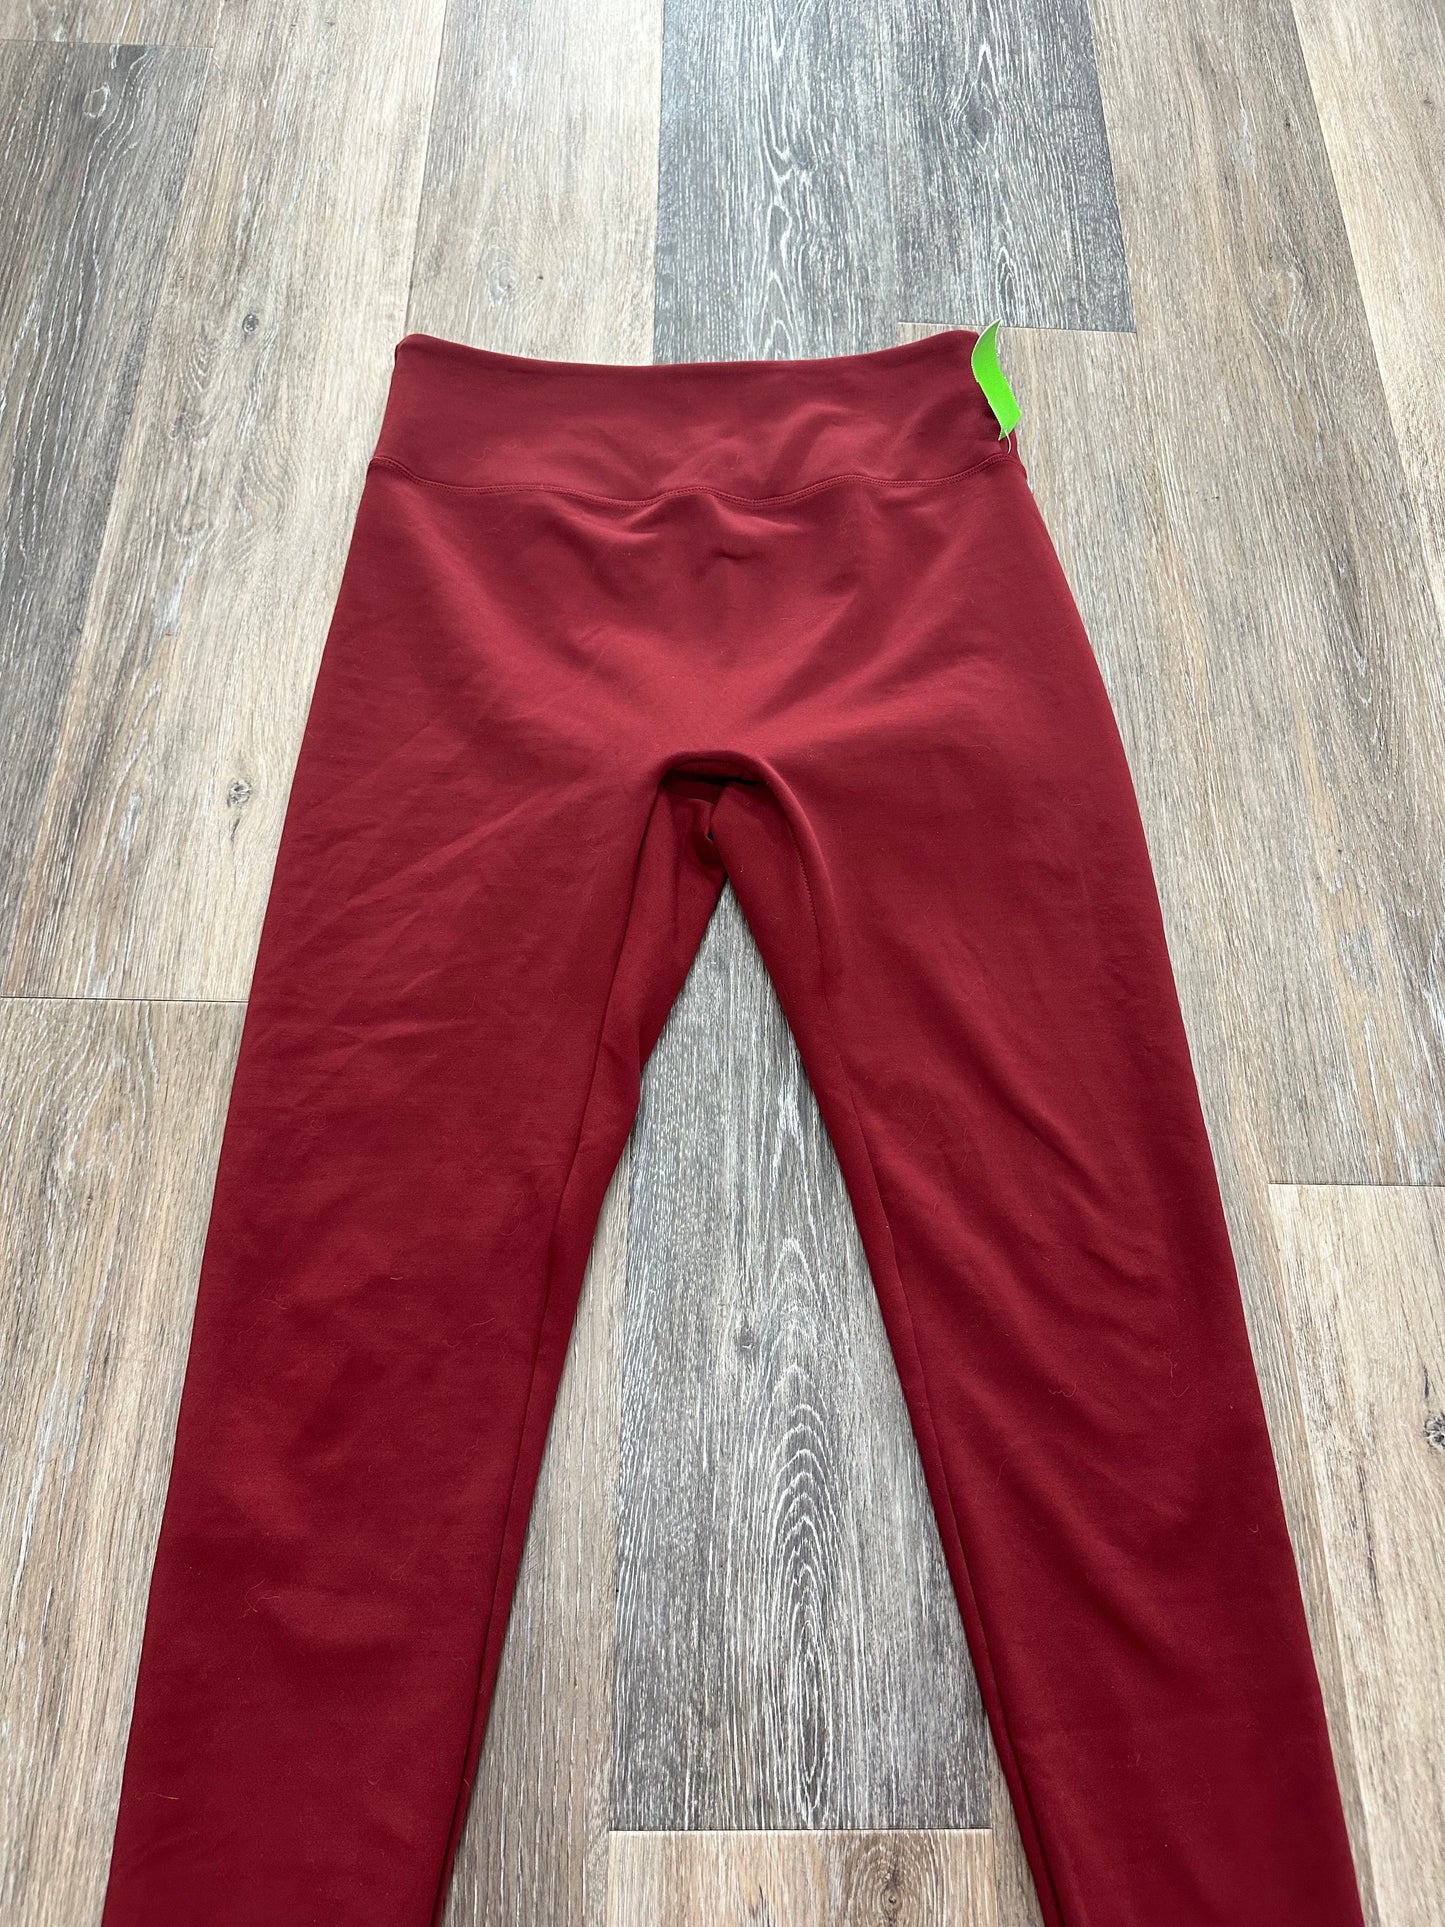 Athletic Leggings By Girlfriend Collective   Size: L